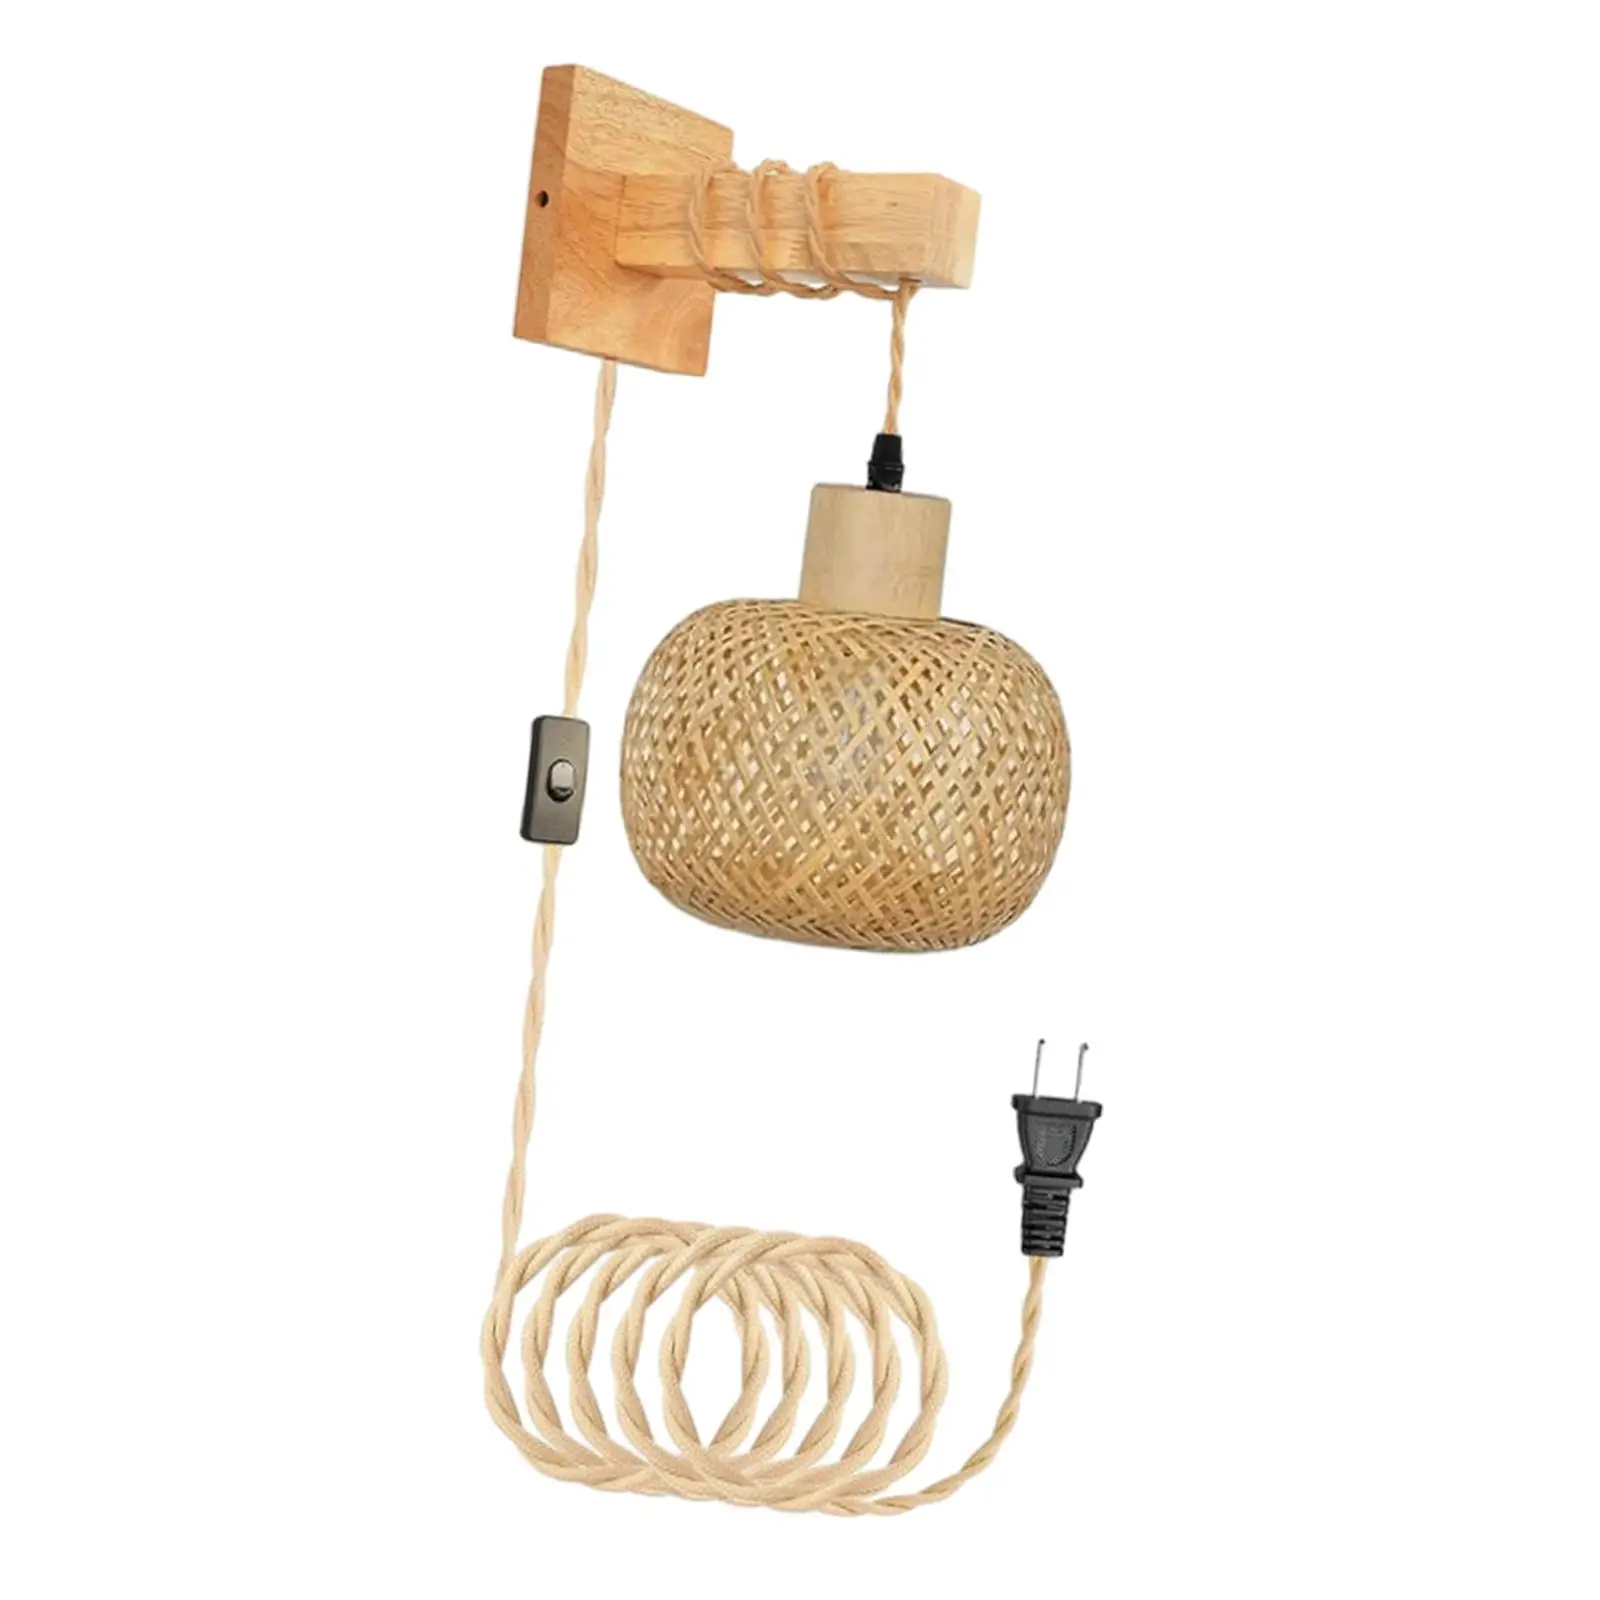 Bamboo Wall Sconce Hand Woven Wall Mount Sconce E26 Base Bathroom Vanity Wall Light for Bedroom Bathroom Kitchen Home Hallway